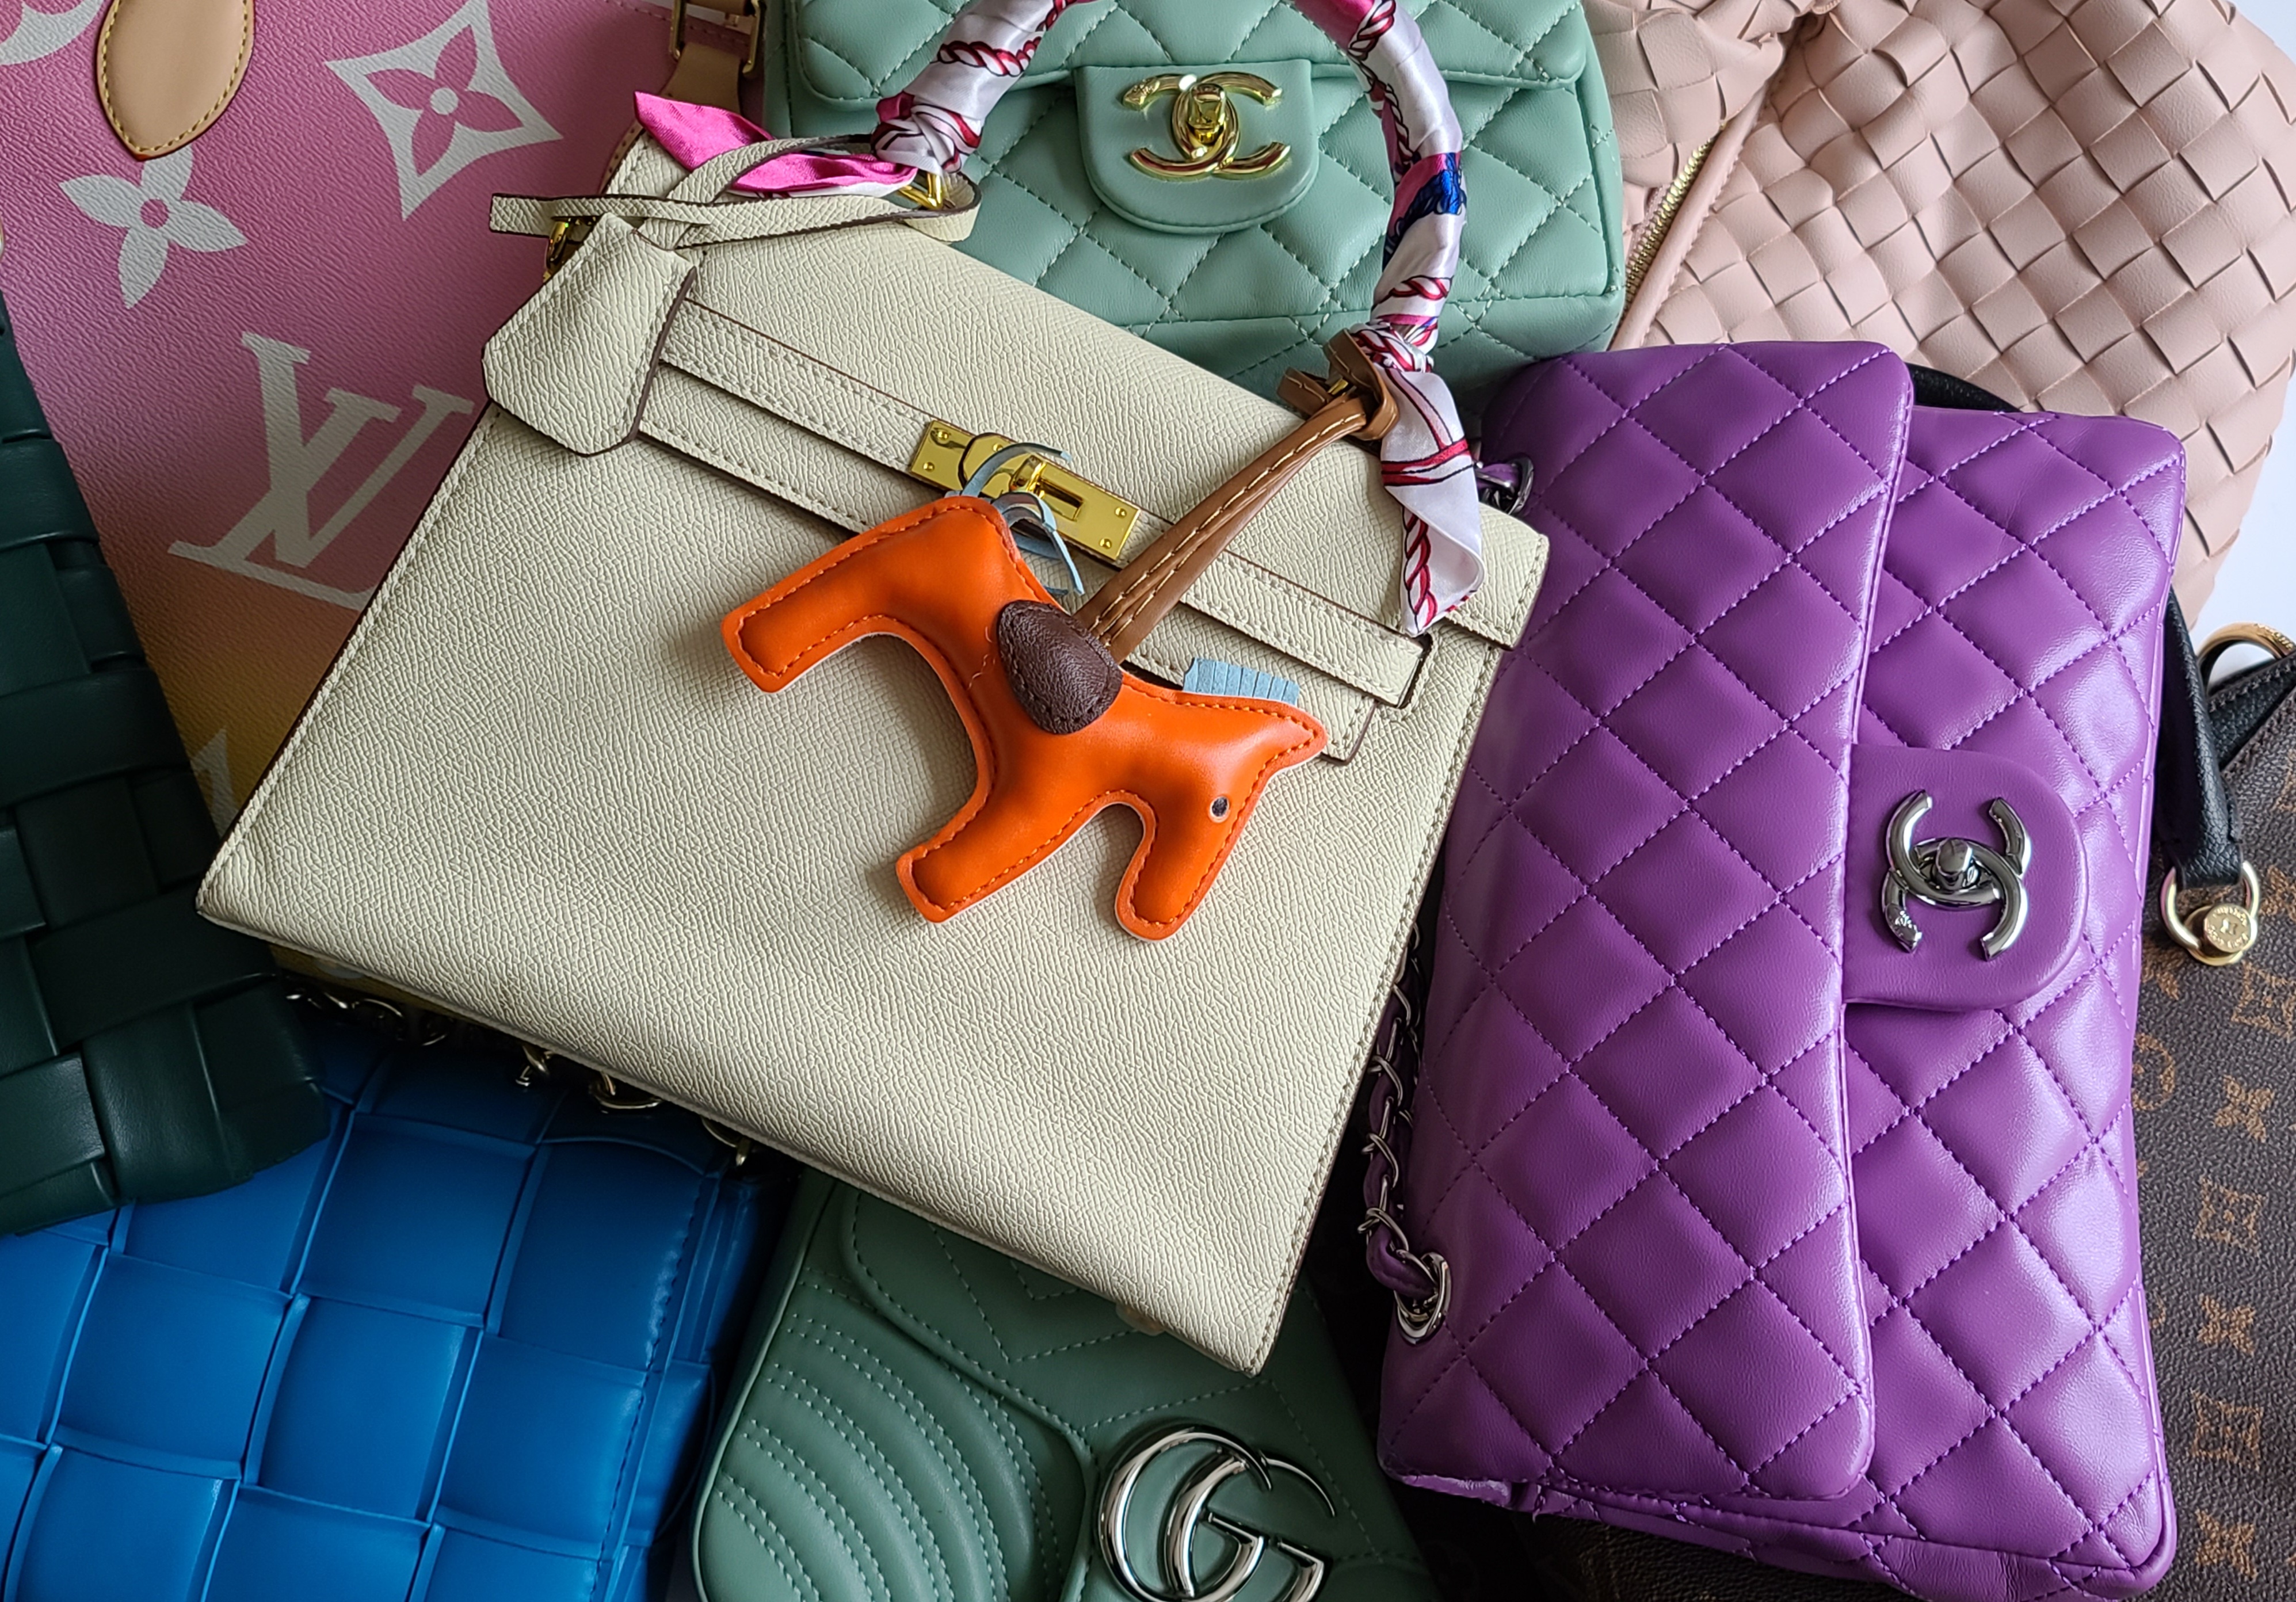 12 Things You Should Always Keep in Your Purse